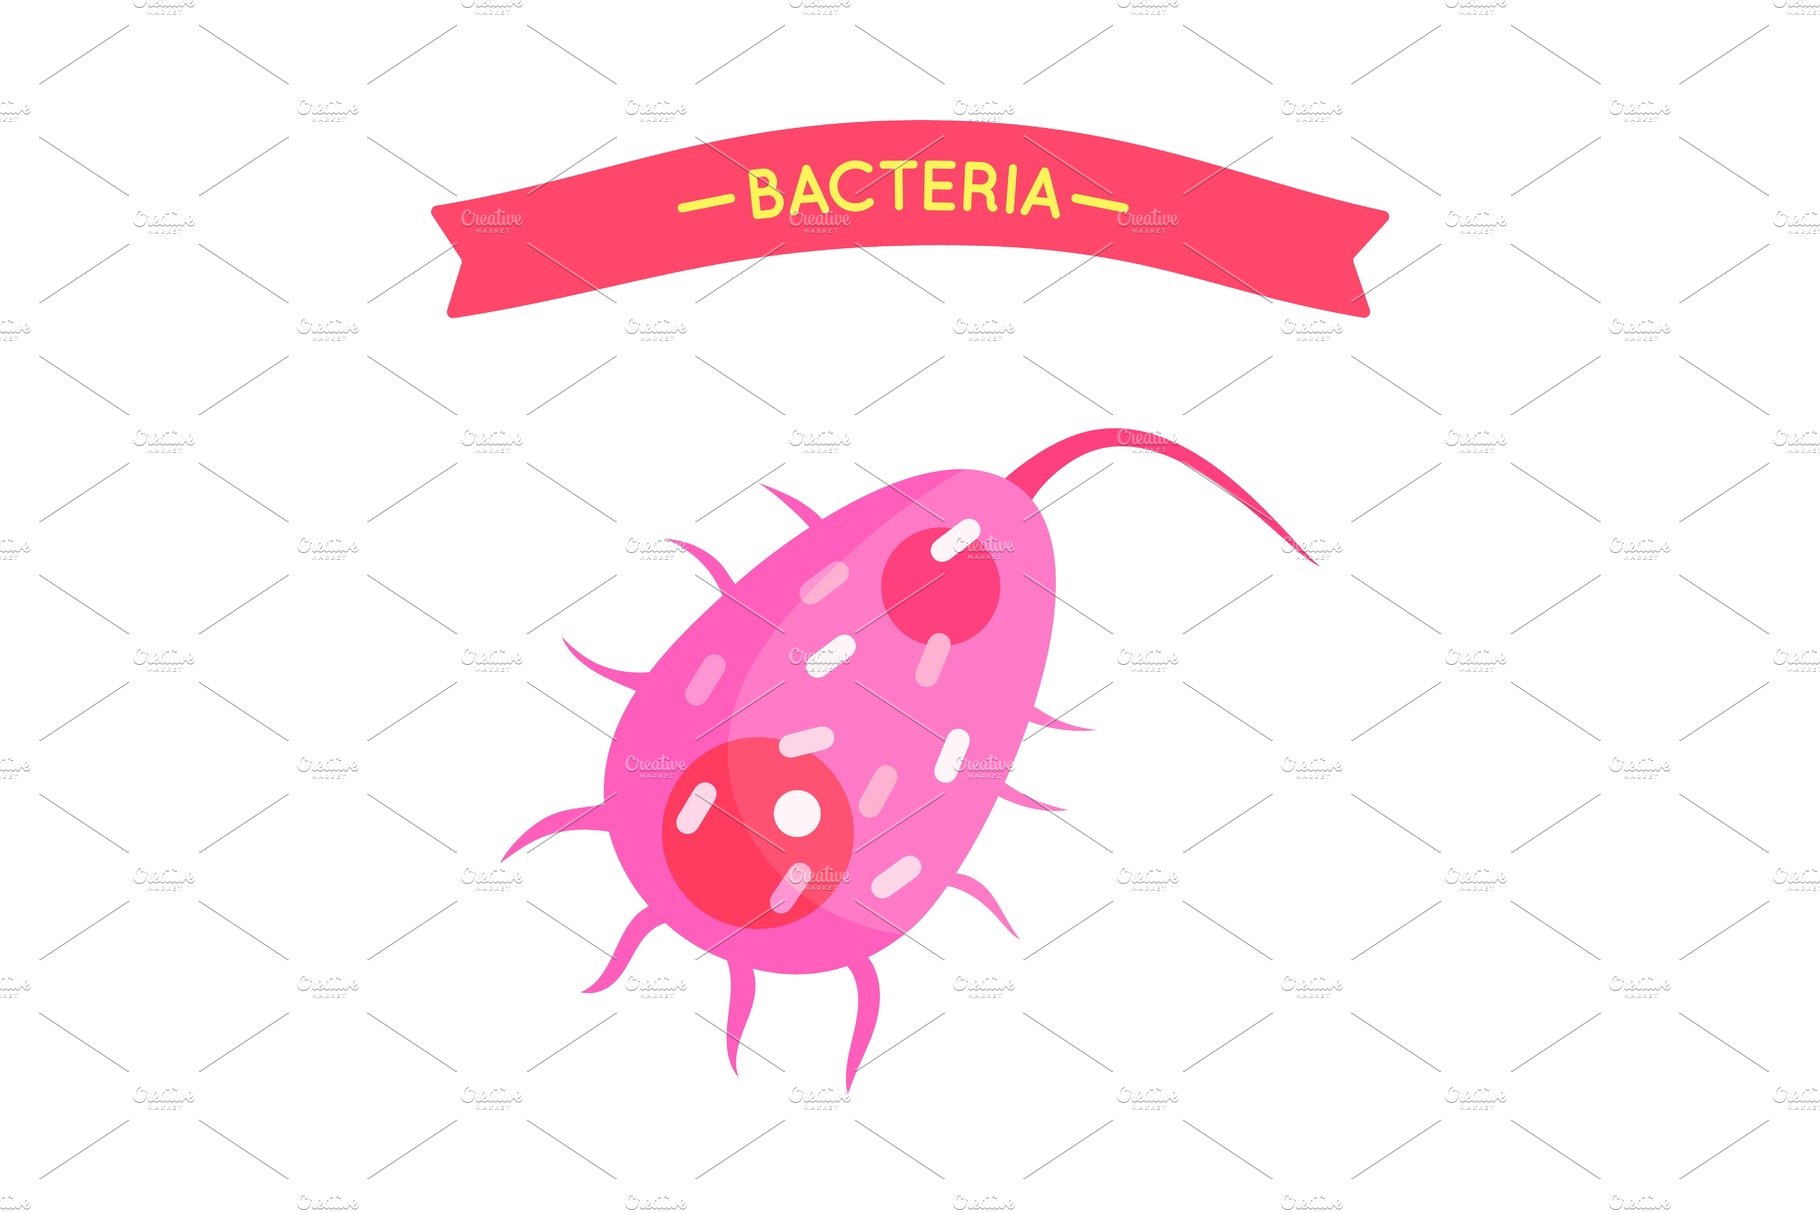 Bacteria and Virus Poster Vector cover image.